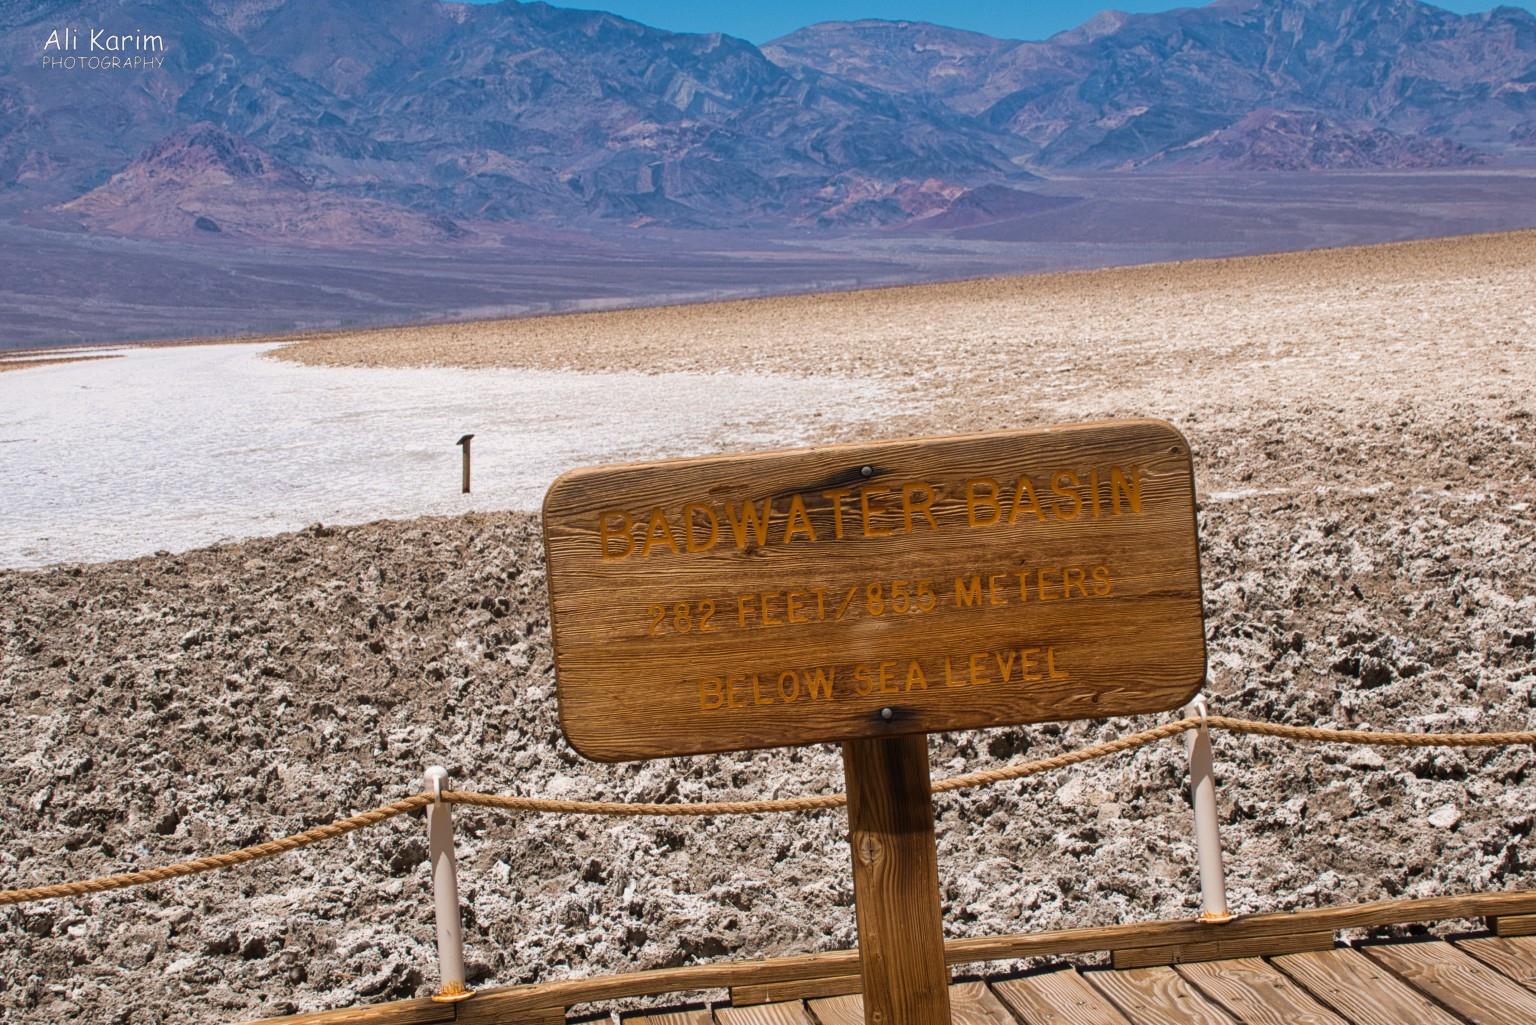 Death Valley National Park, June 2020, Badwater Basin, 282ft below Sea level, with salt flats behind